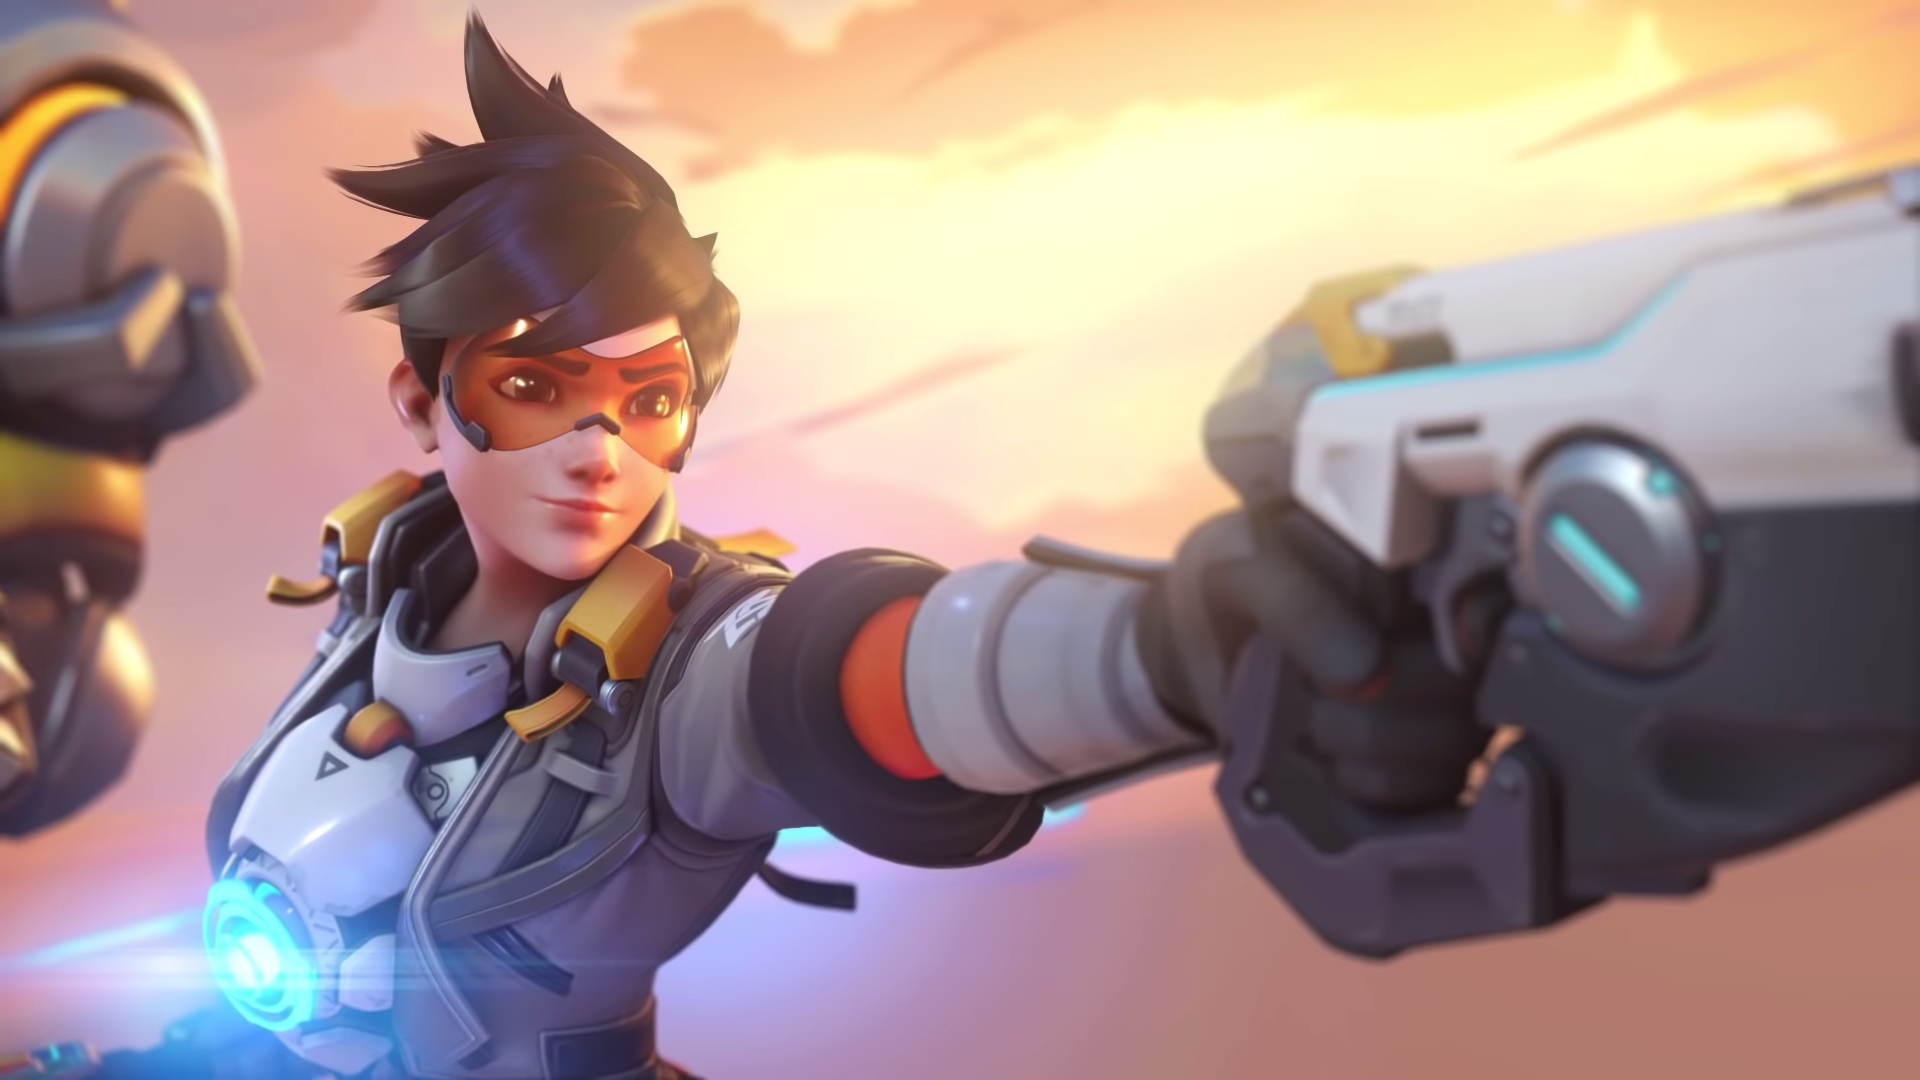 'Overwatch 2' Unveiled During BlizzCon 2019 — Details
